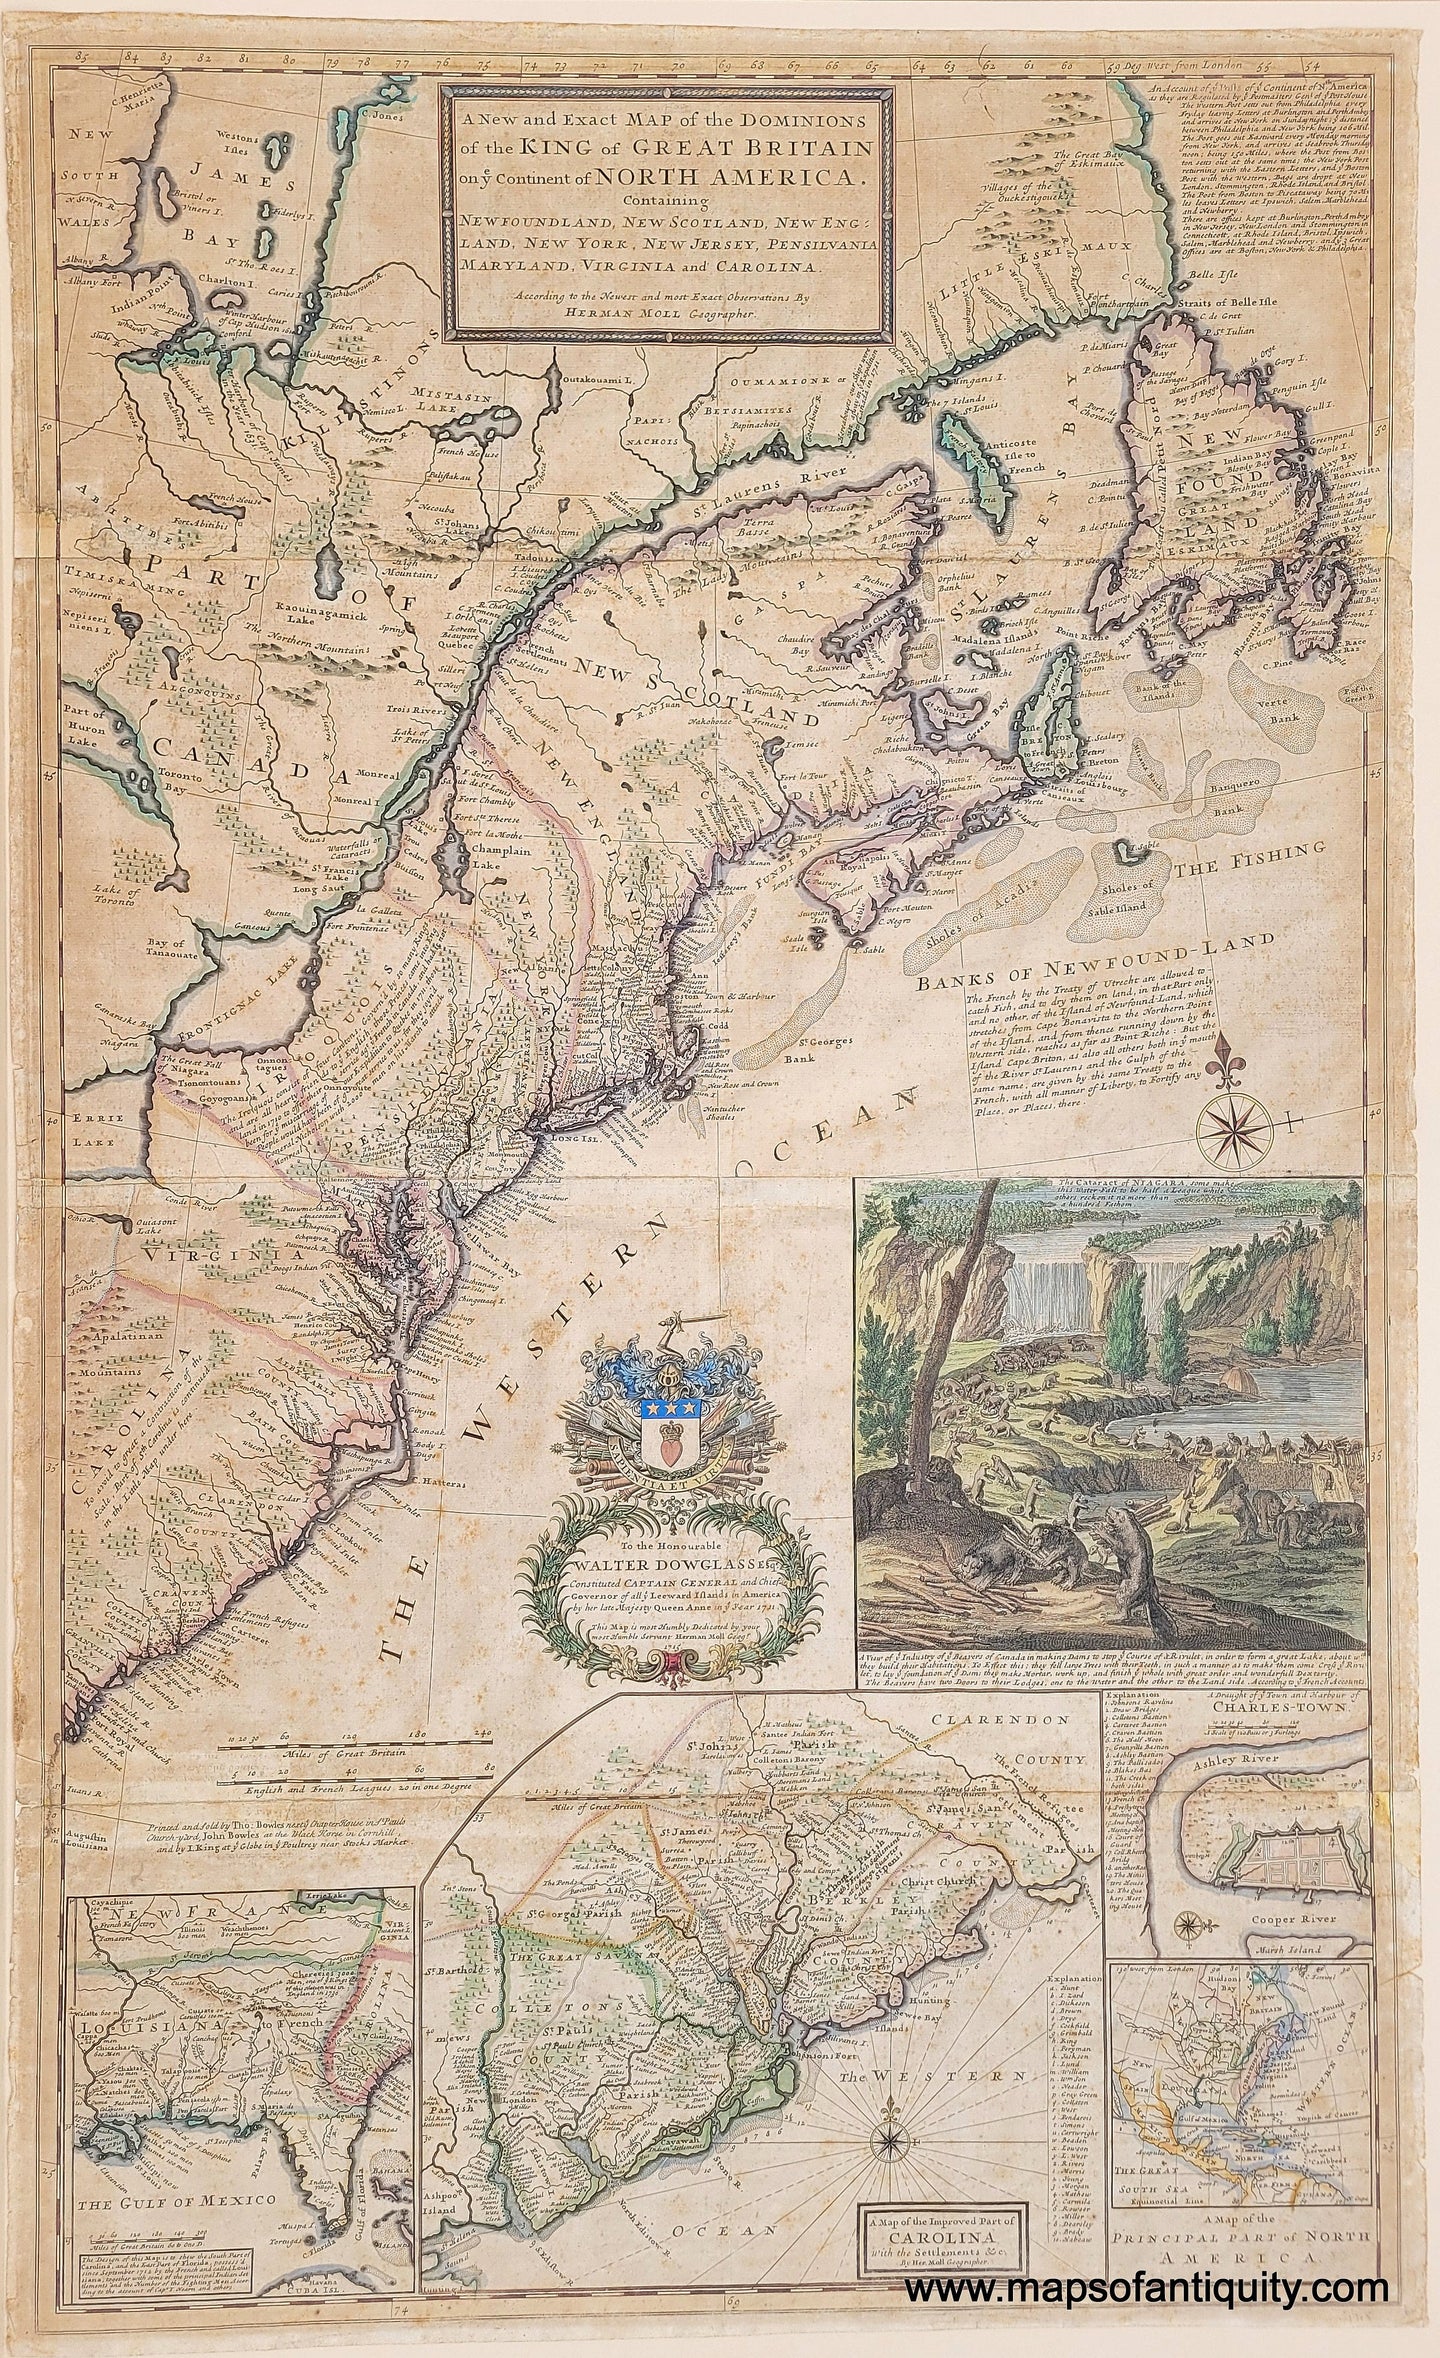 Genuine-Antique-Map-Moll-Beaver-Map-A-New-and-Exact-Map-of-the-Dominions-of-the-King-of-Great-Britain-on-ye-Continent-of-North-America-1733-Moll-Maps-Of-Antiquity